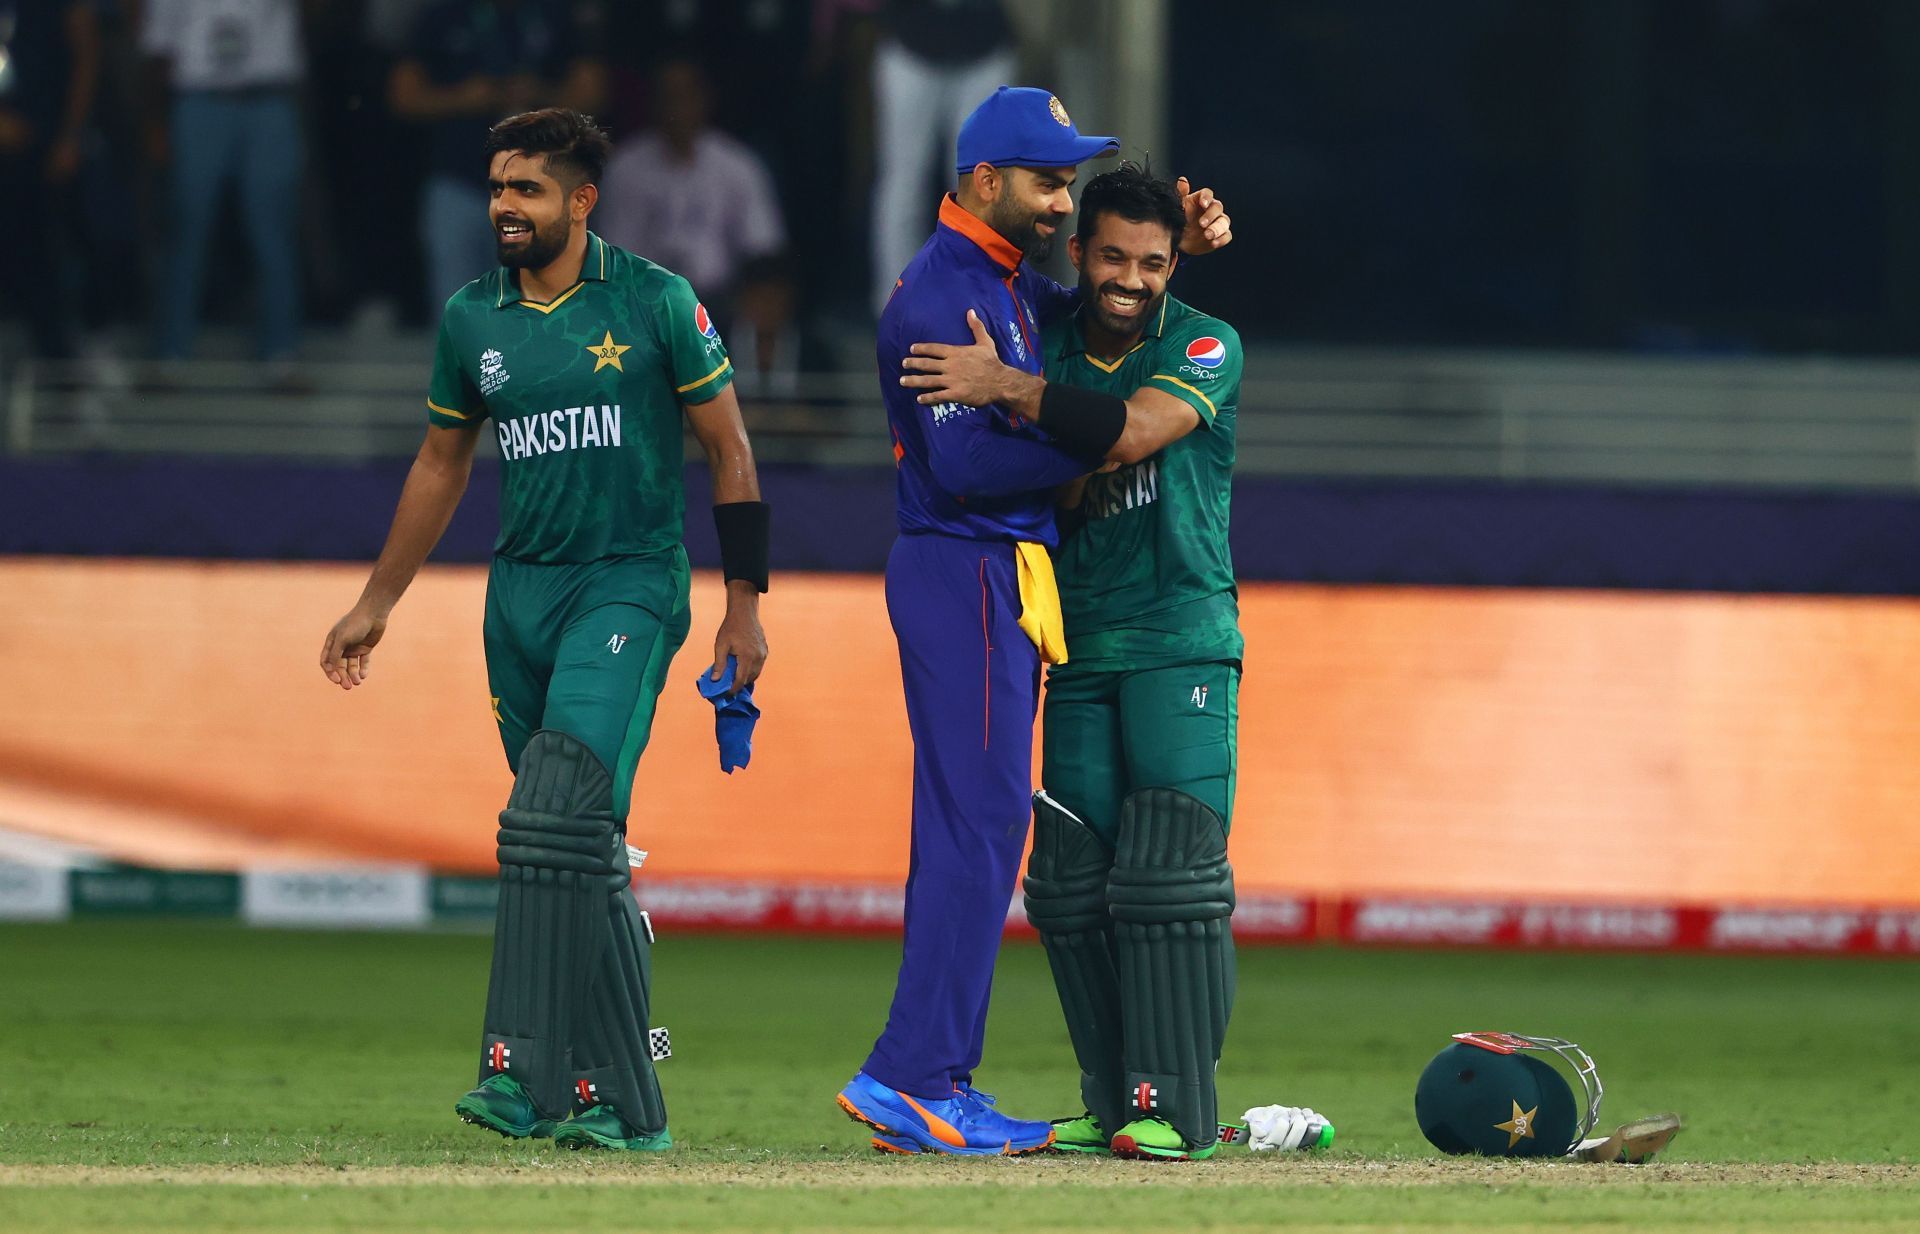 Pakistan registered a resounding win against Team India